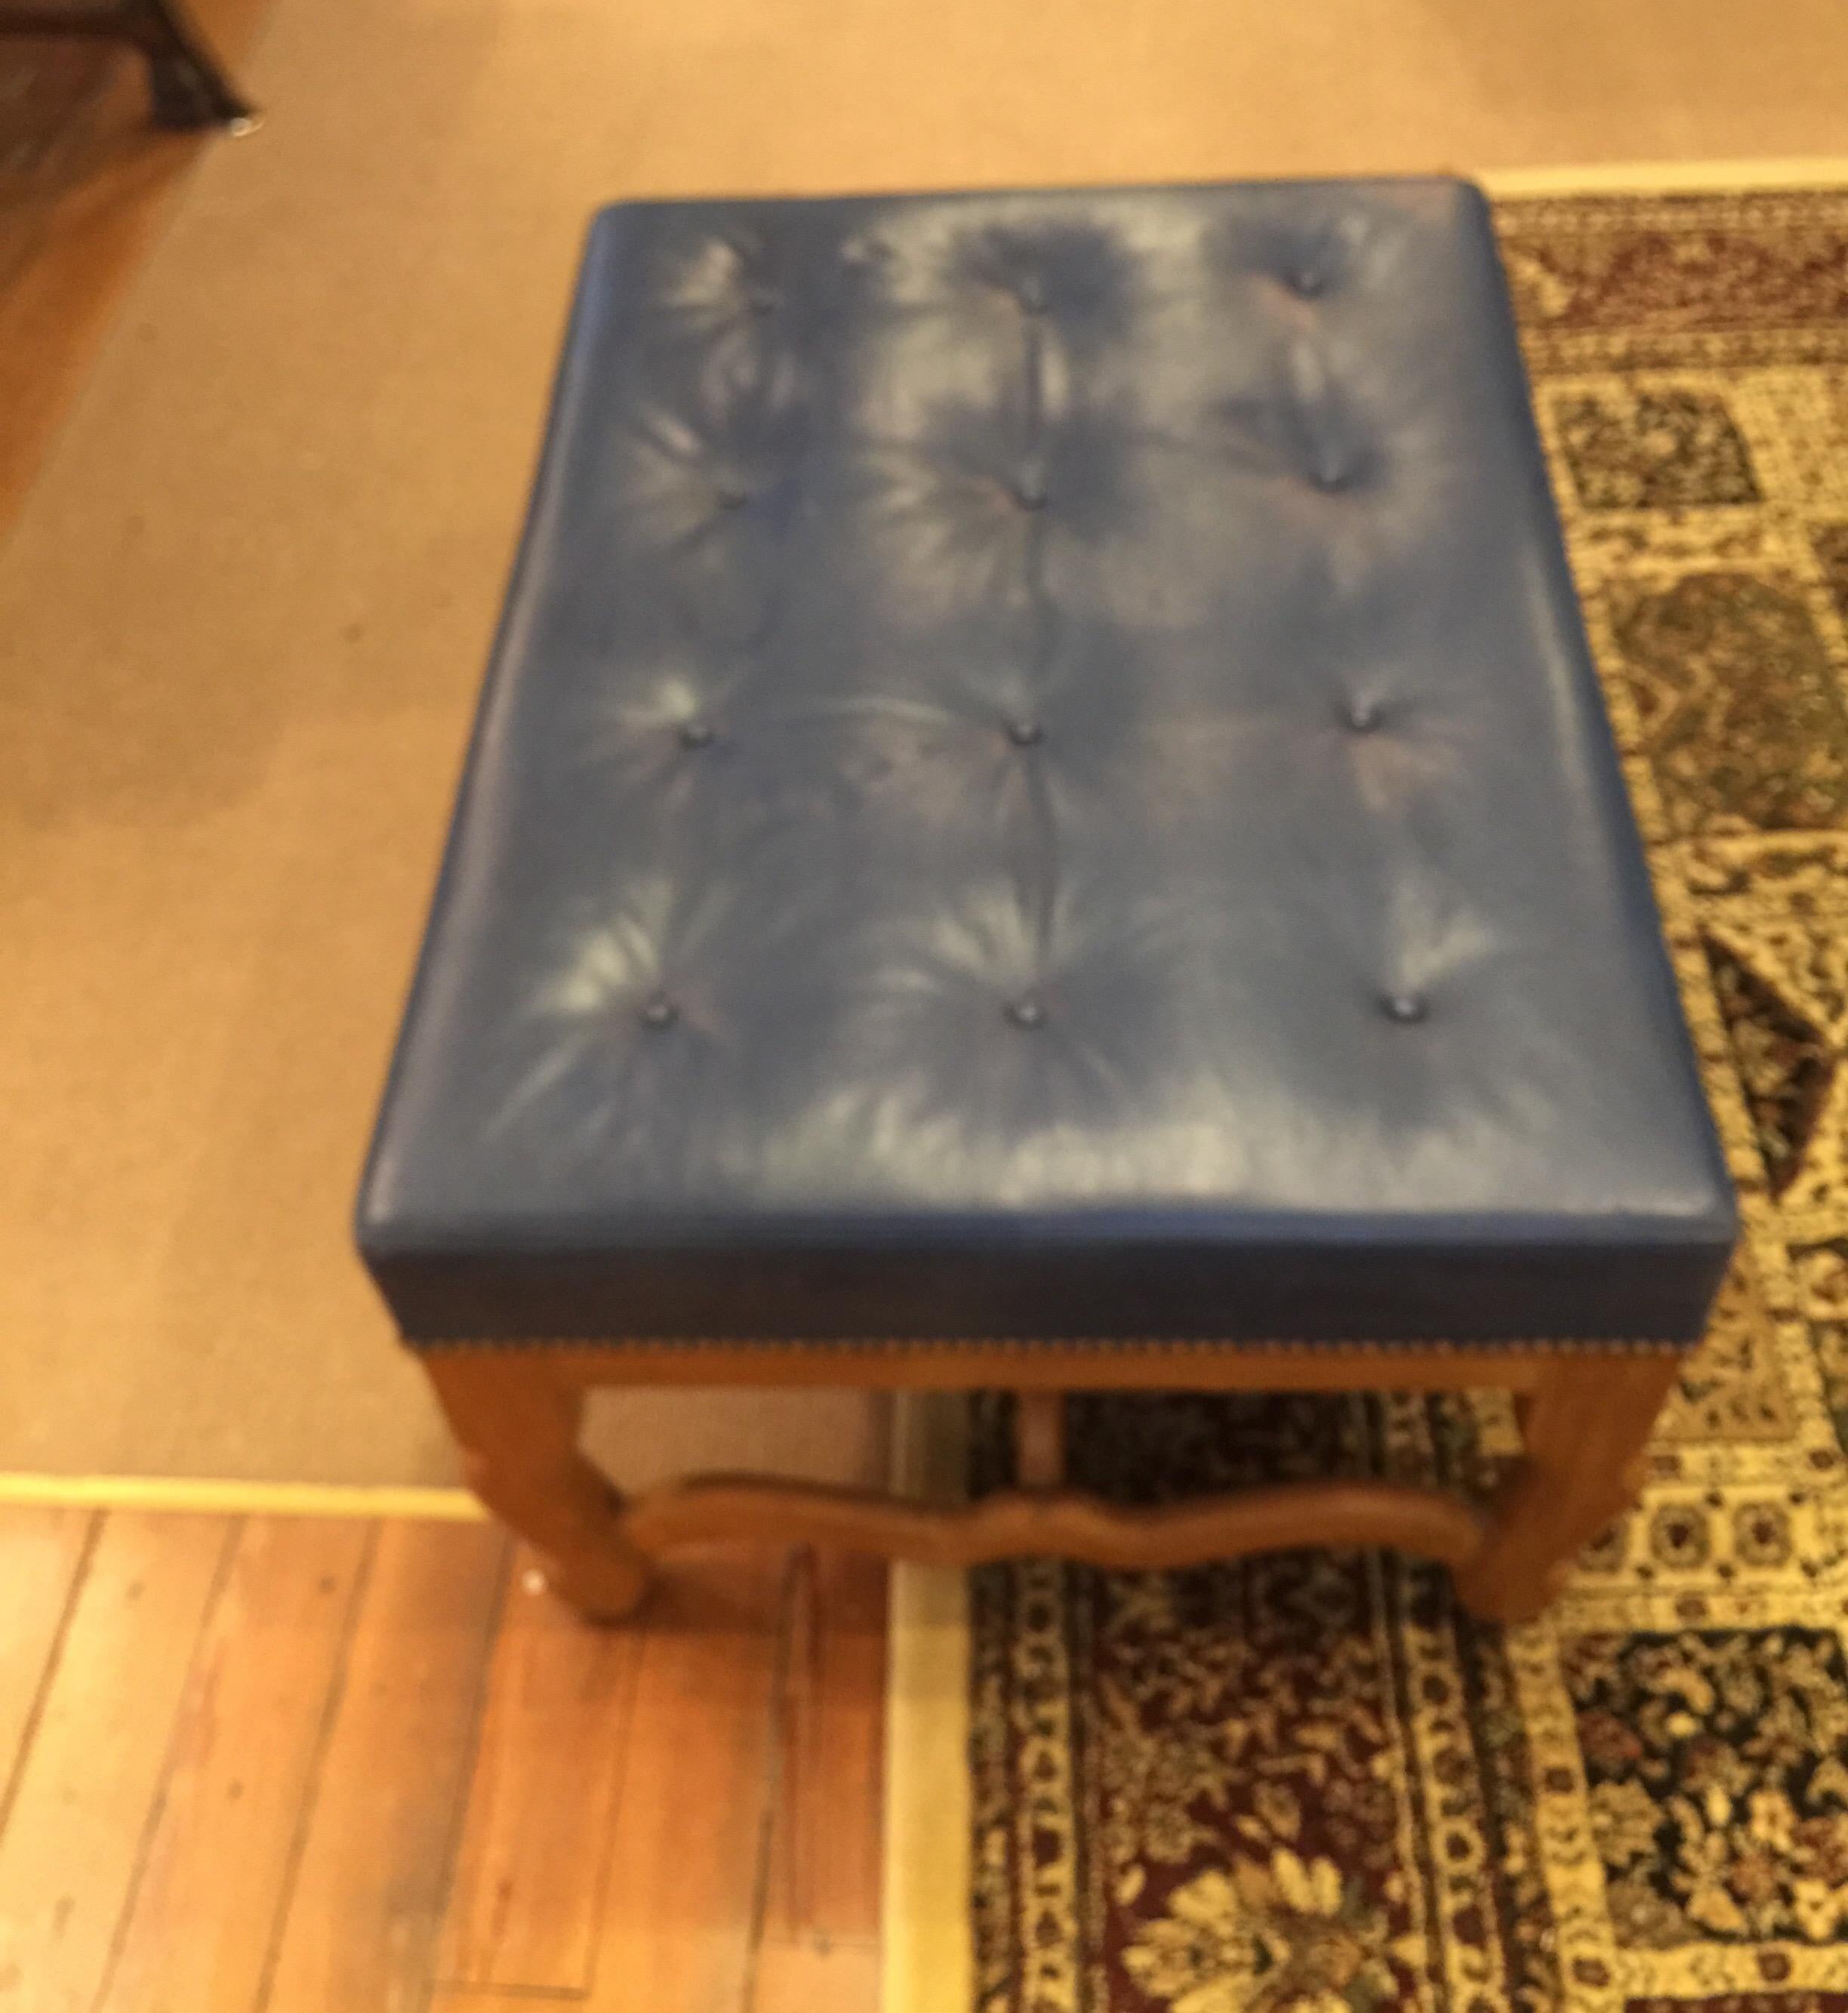 Midcentury dark blue large leather ottoman by Baker, frame is in very good condition, the leather has some wear but can be easily recovered if desired
Dimensions: 25